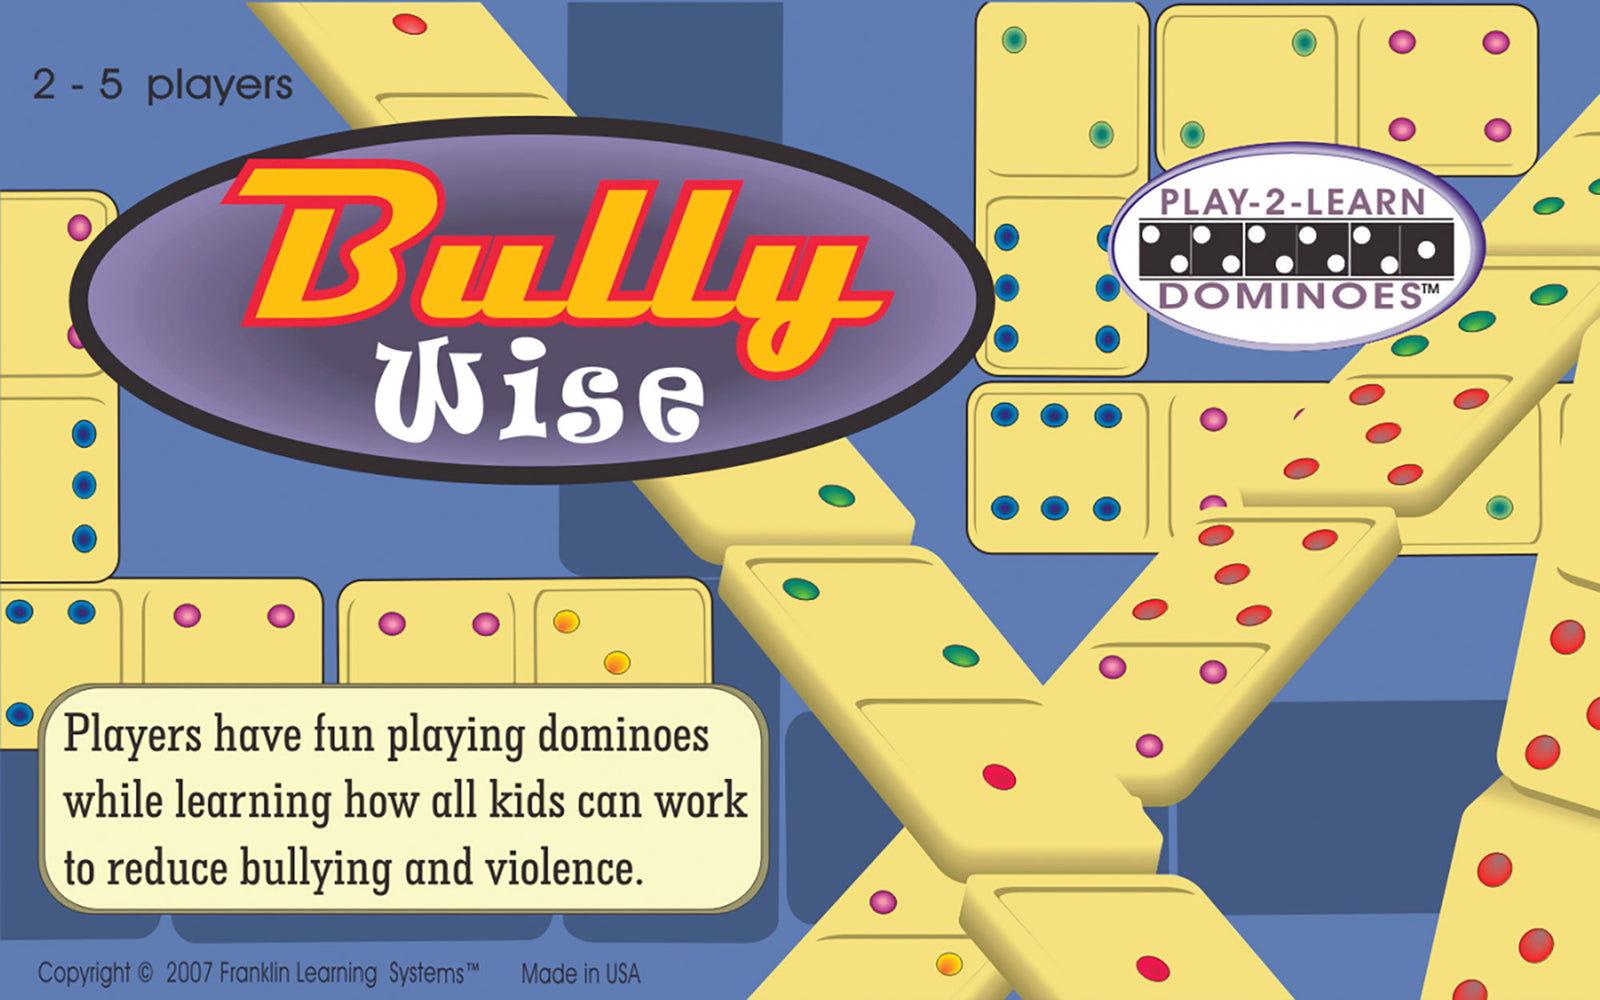 Is 'Bully' fun to play? Like, for real